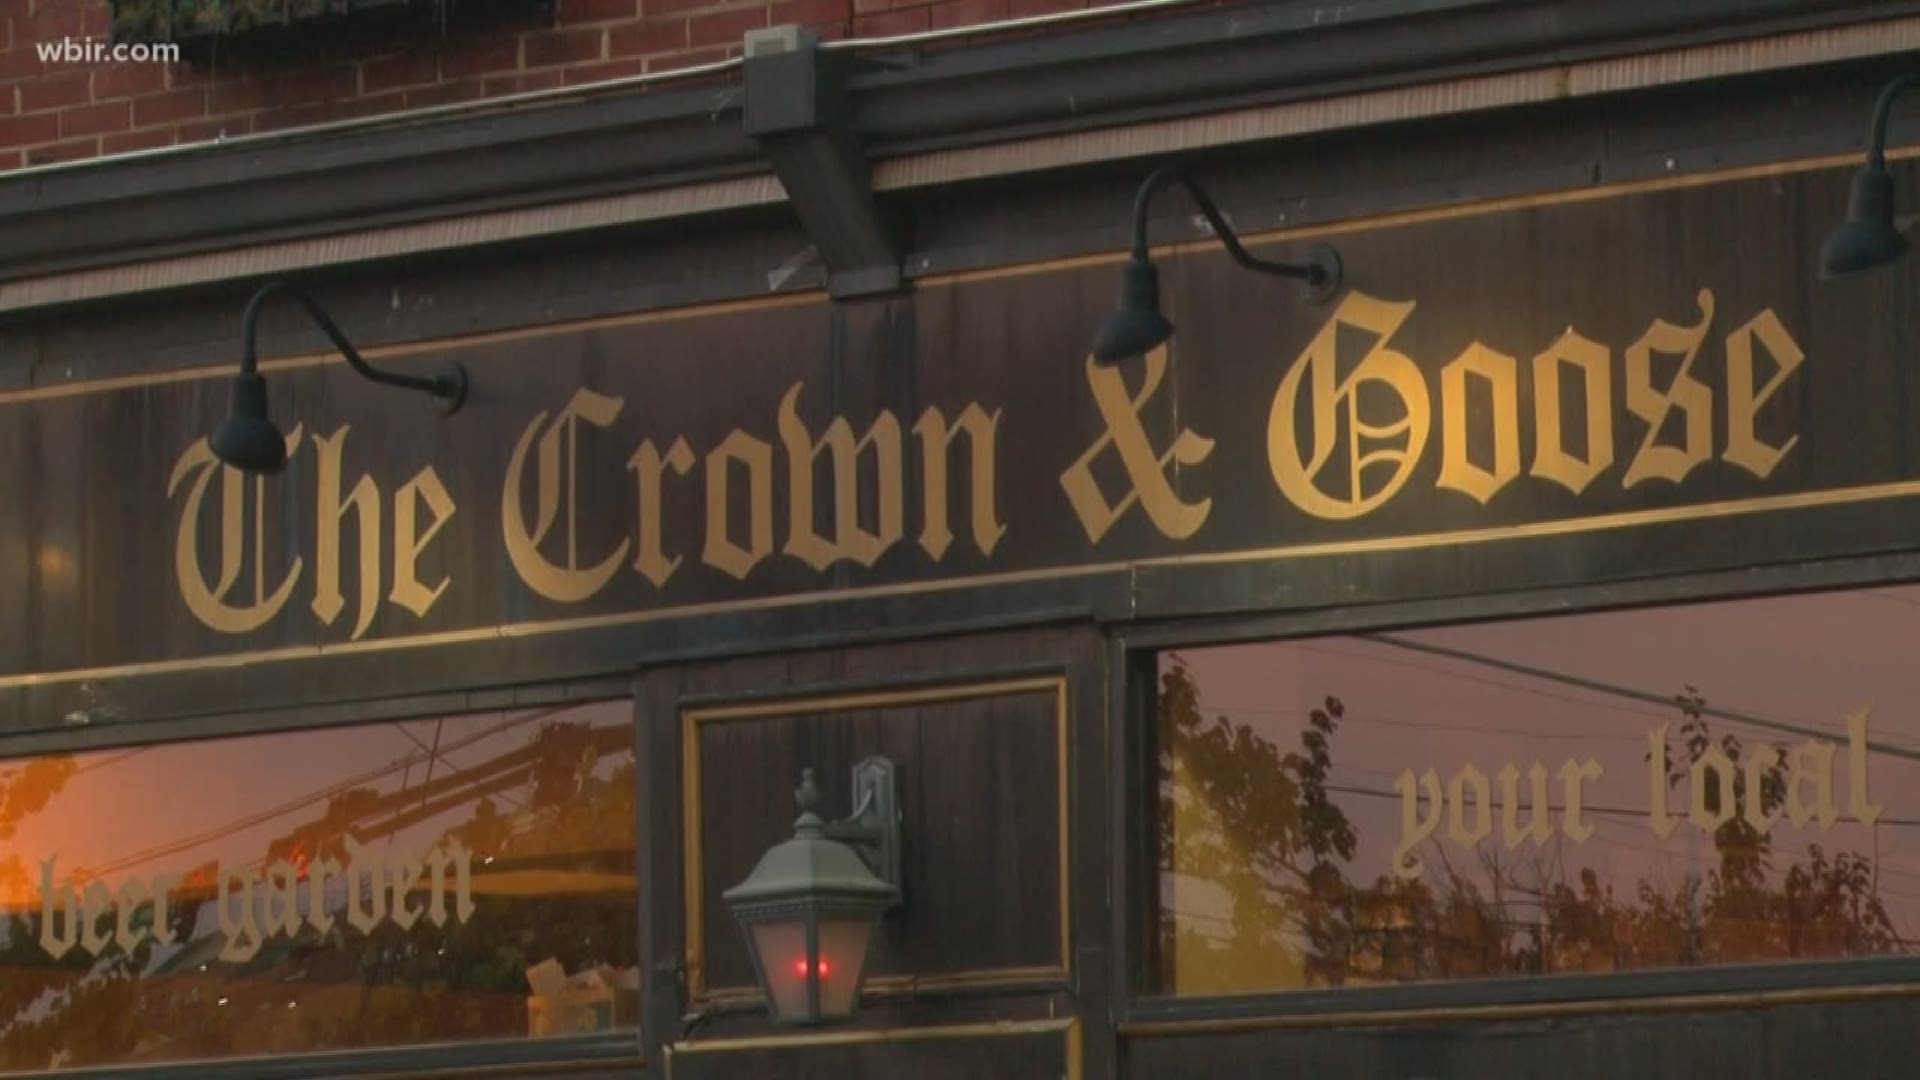 Crown and Goose will close its doors at the end of the month, and so far the new owners haven't decided how to replace it.